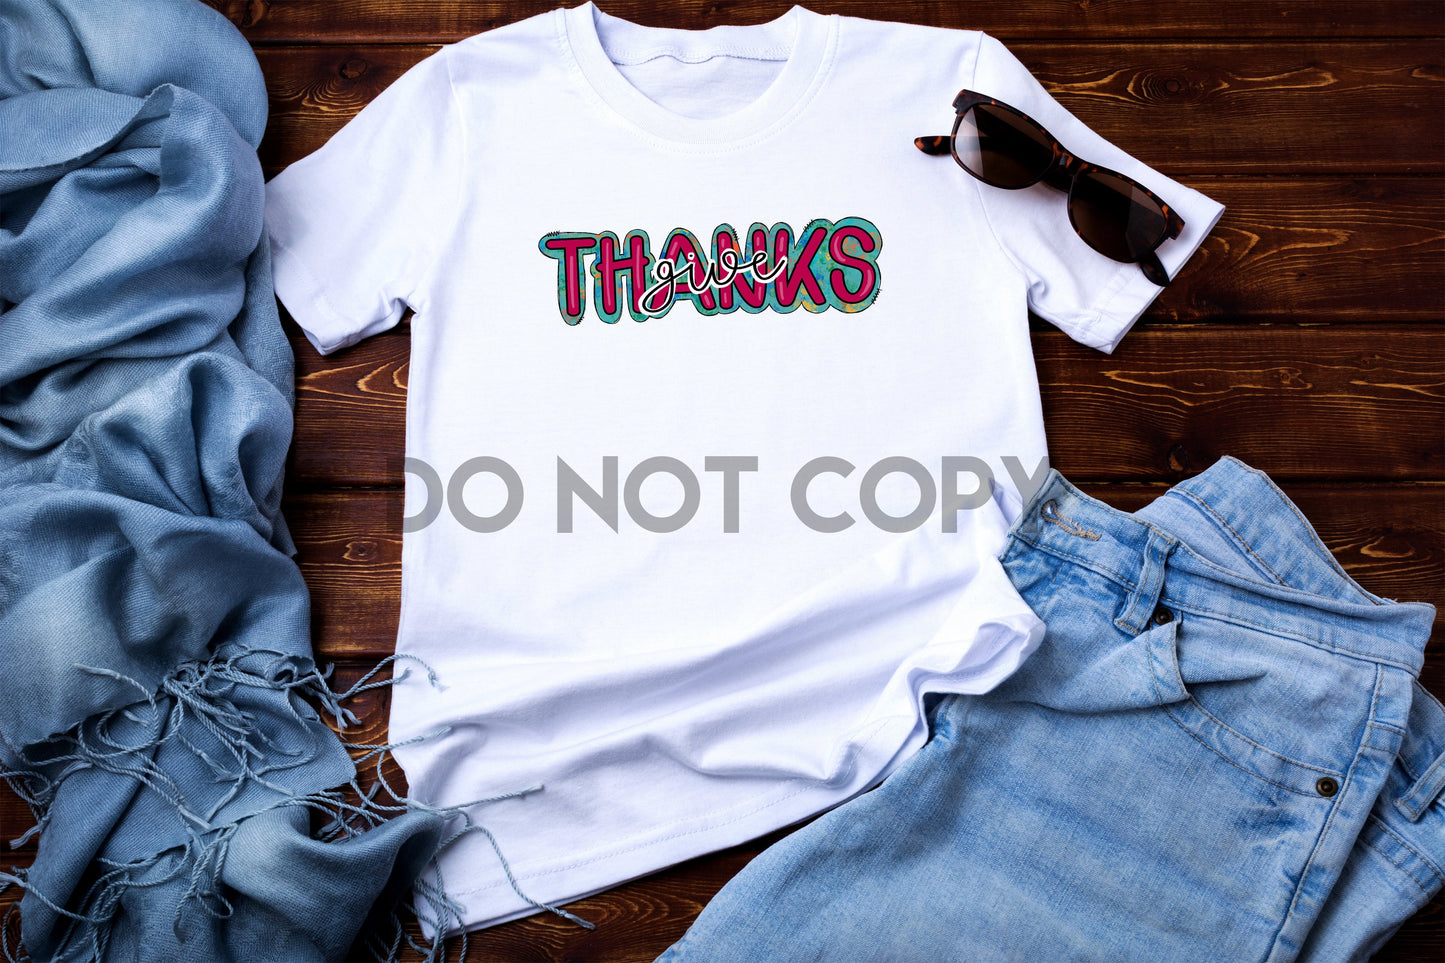 Give Thanks Sublimation print